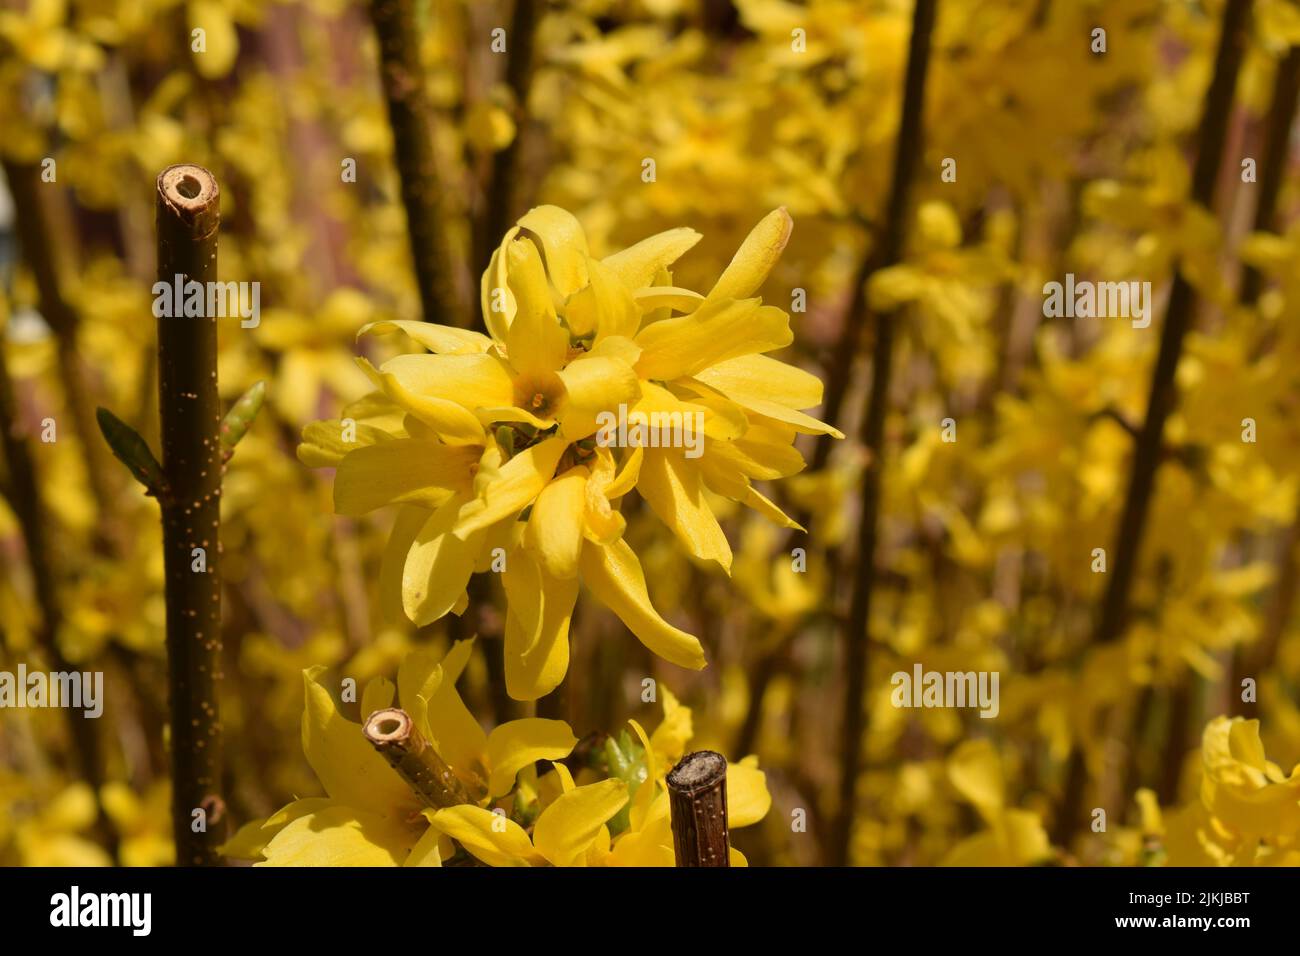 A closeup shot of a yellow forsythia on the blurry background Stock Photo